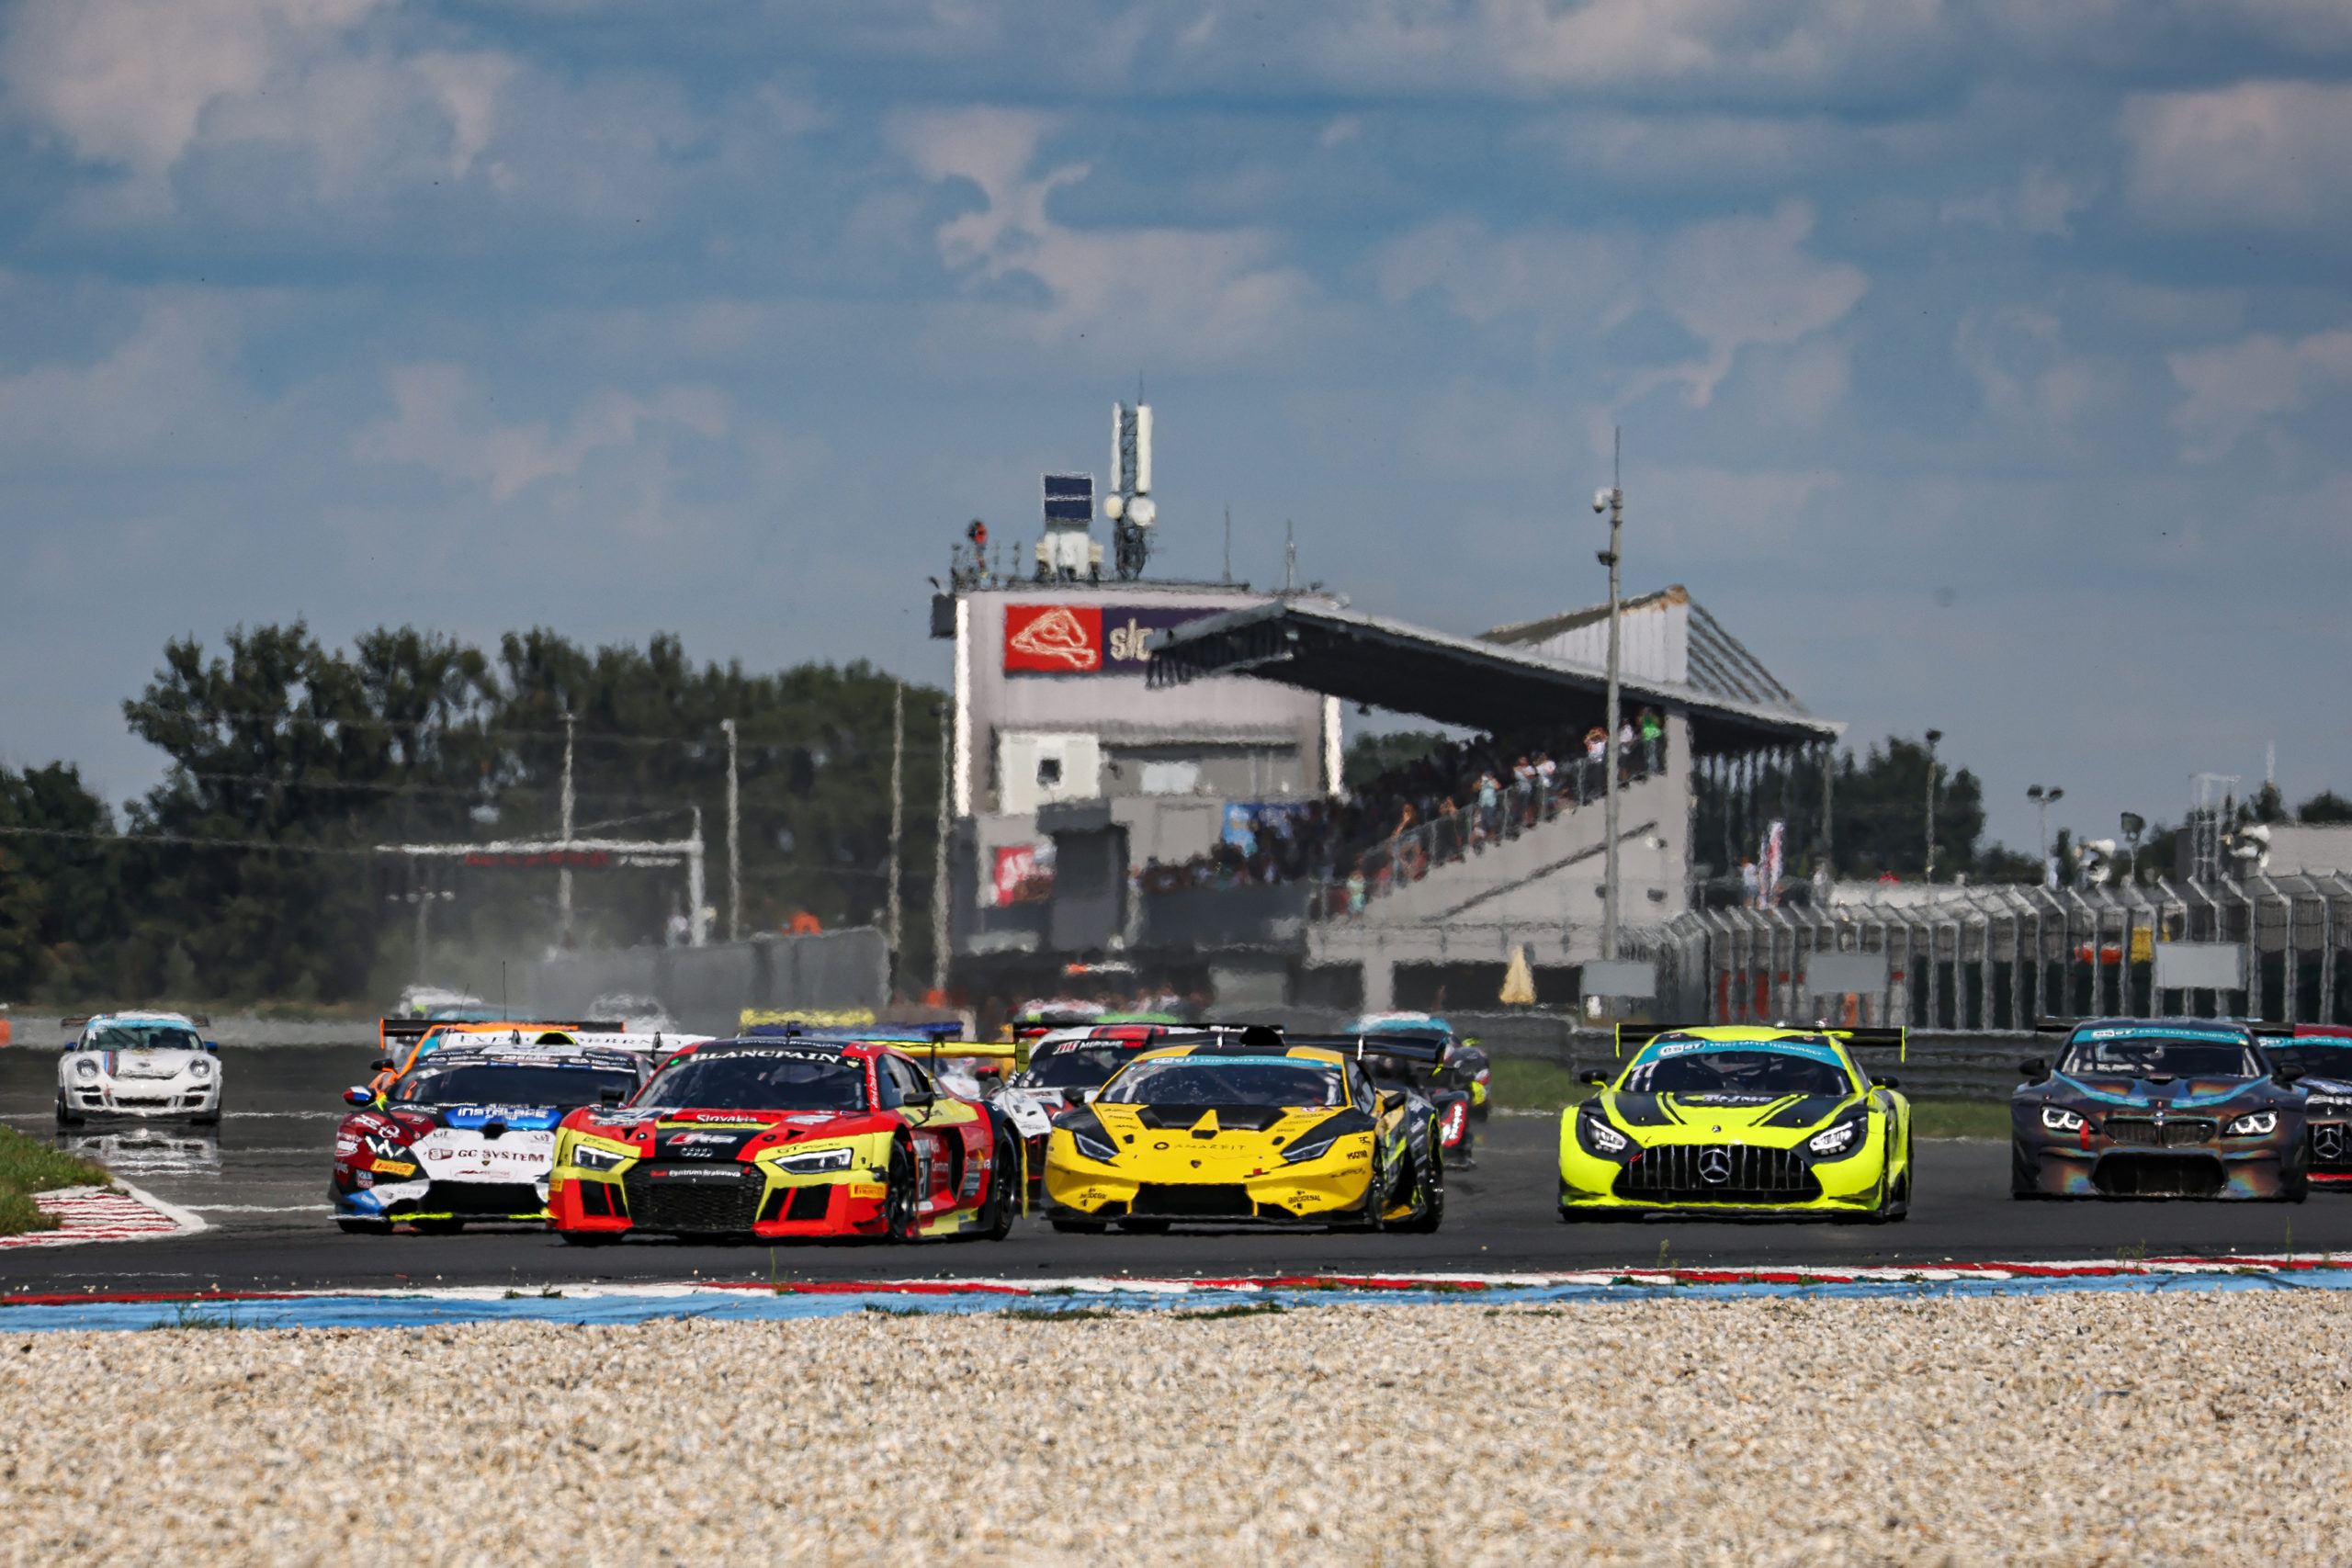 Fight for the ESET GT championship continues at Slovakia Ring